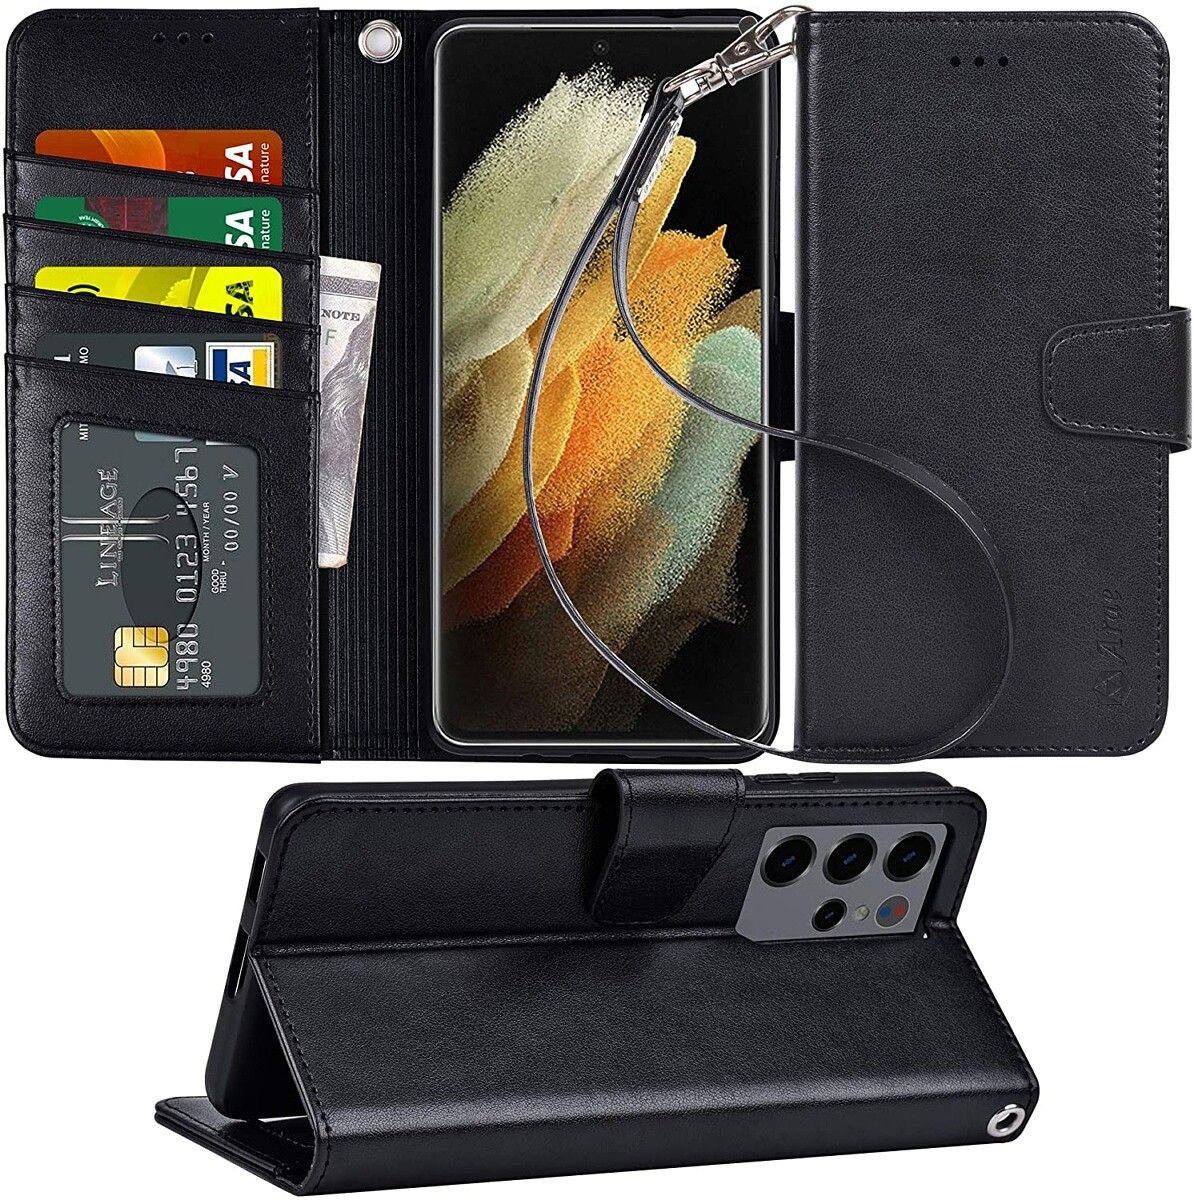 Want a wallet bag?  Arae Case has that for you.  You'll be able to store a number of cards in this tri-fold case, and it can even prop up your phone!  Just be sure to get a screen protector, so your cards don't scratch the screen!